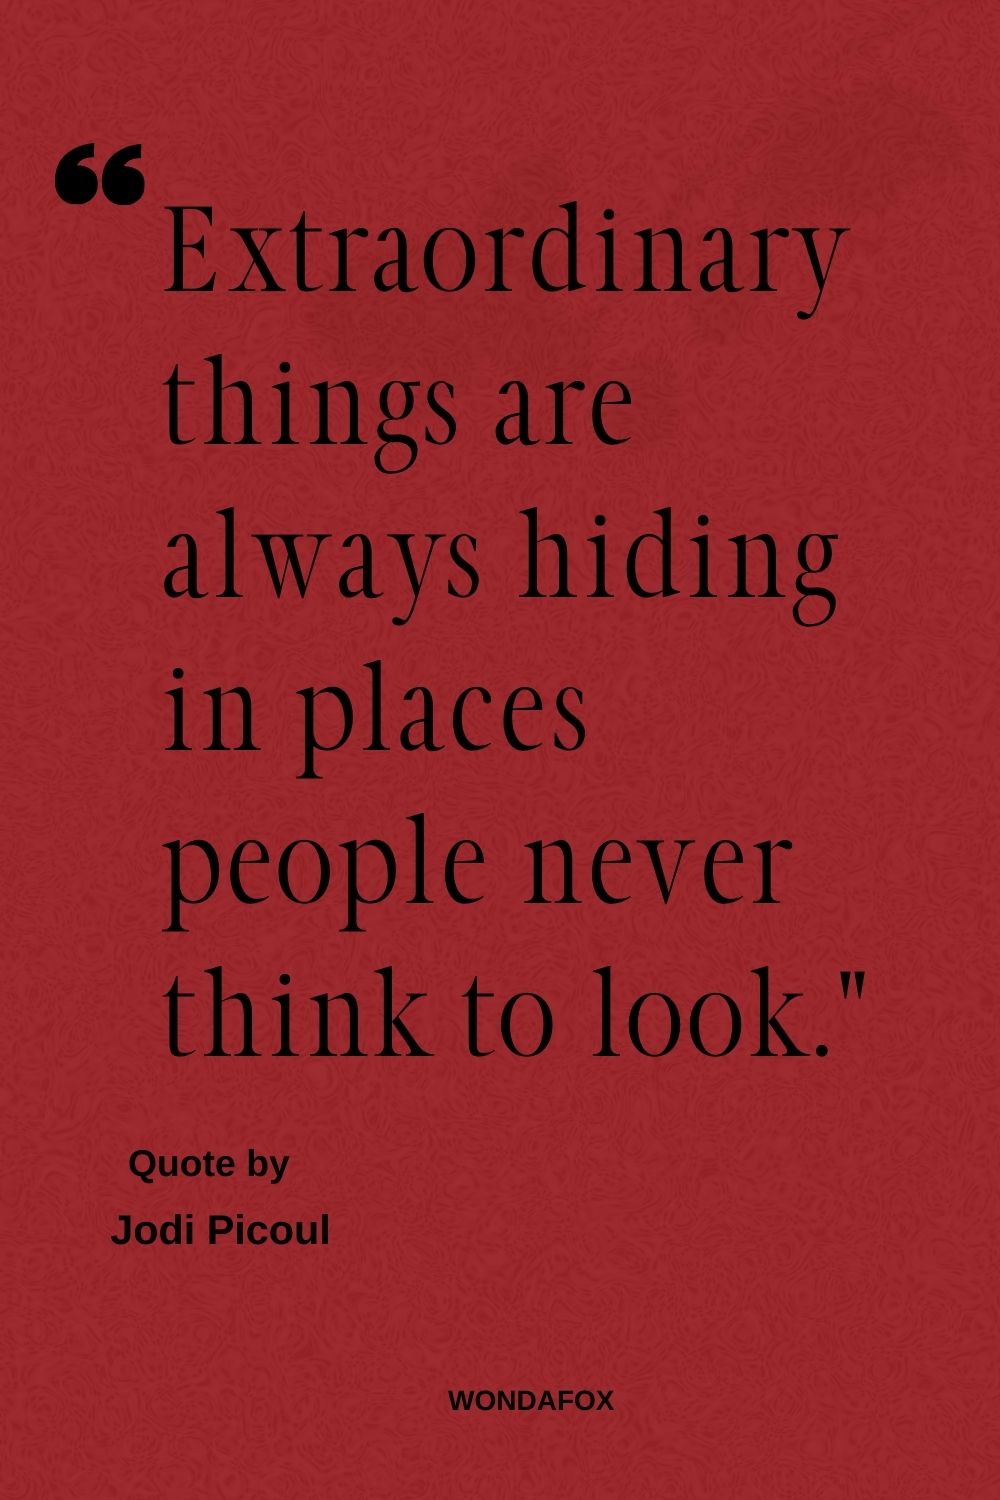 “Extraordinary things are always hiding in places people never think to look.”
Jodi Picoul